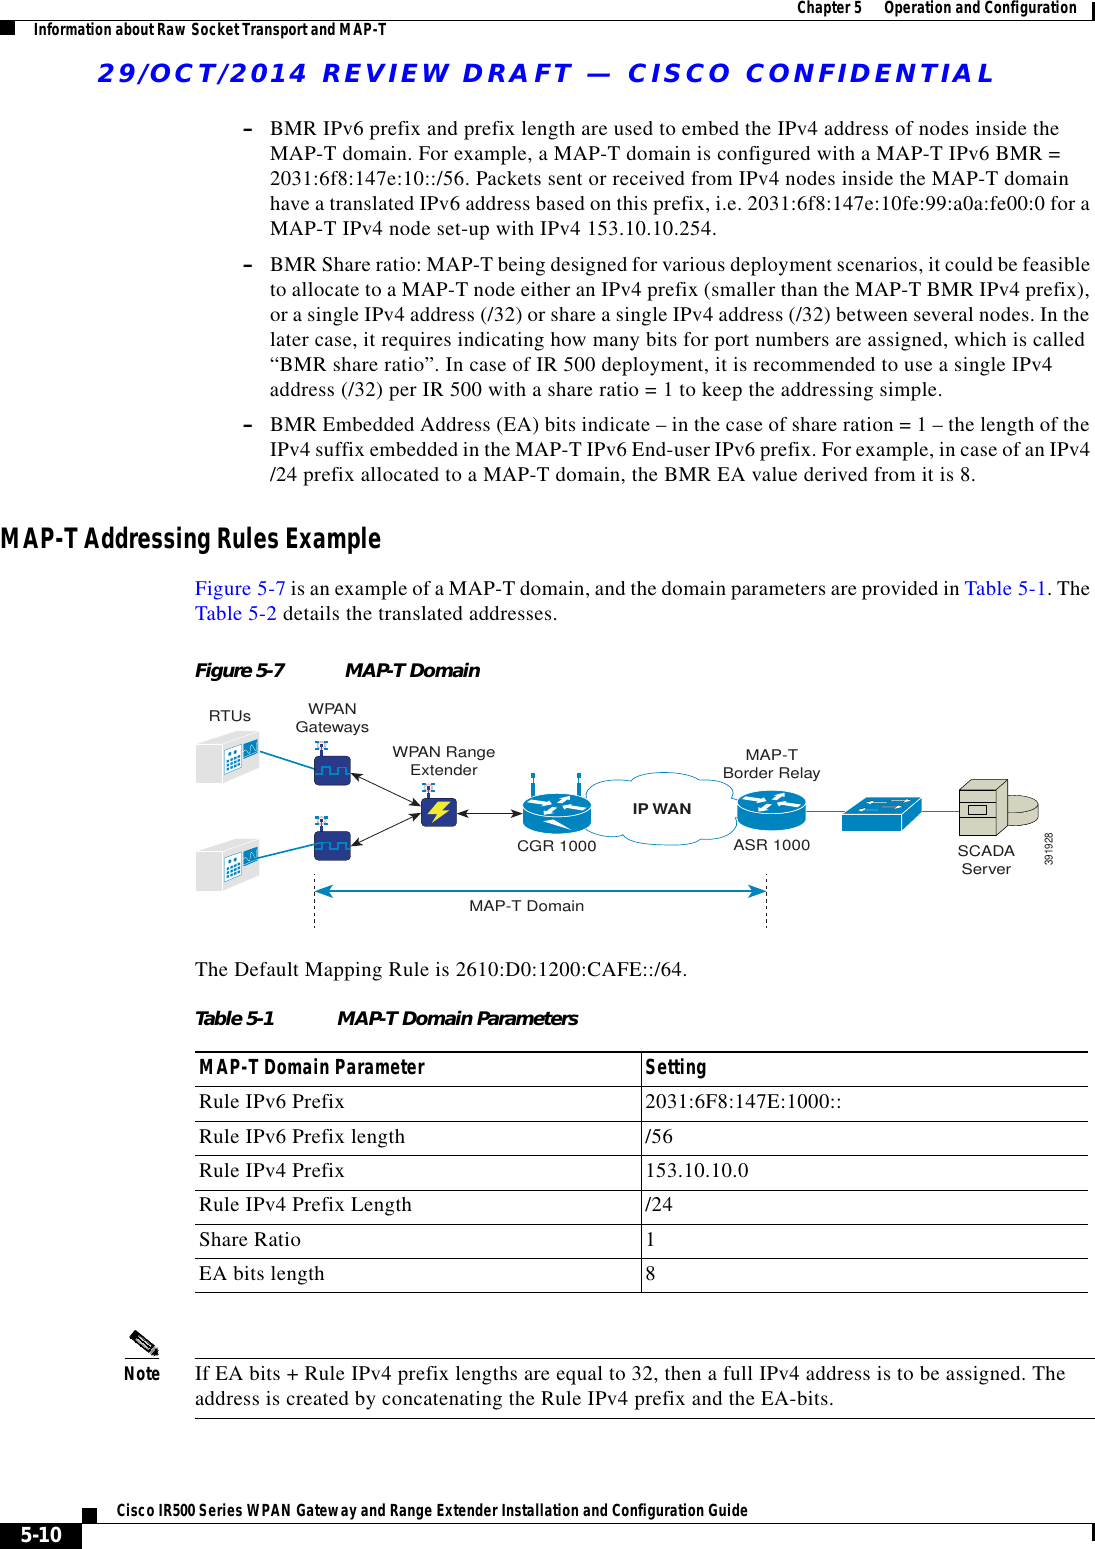 29/OCT/2014 REVIEW DRAFT — CISCO CONFIDENTIAL5-10Cisco IR500 Series WPAN Gateway and Range Extender Installation and Configuration Guide  Chapter 5      Operation and Configuration Information about Raw Socket Transport and MAP-T –BMR IPv6 prefix and prefix length are used to embed the IPv4 address of nodes inside the MAP-T domain. For example, a MAP-T domain is configured with a MAP-T IPv6 BMR = 2031:6f8:147e:10::/56. Packets sent or received from IPv4 nodes inside the MAP-T domain have a translated IPv6 address based on this prefix, i.e. 2031:6f8:147e:10fe:99:a0a:fe00:0 for a MAP-T IPv4 node set-up with IPv4 153.10.10.254.  –BMR Share ratio: MAP-T being designed for various deployment scenarios, it could be feasible to allocate to a MAP-T node either an IPv4 prefix (smaller than the MAP-T BMR IPv4 prefix), or a single IPv4 address (/32) or share a single IPv4 address (/32) between several nodes. In the later case, it requires indicating how many bits for port numbers are assigned, which is called “BMR share ratio”. In case of IR 500 deployment, it is recommended to use a single IPv4 address (/32) per IR 500 with a share ratio = 1 to keep the addressing simple. –BMR Embedded Address (EA) bits indicate – in the case of share ration = 1 – the length of the IPv4 suffix embedded in the MAP-T IPv6 End-user IPv6 prefix. For example, in case of an IPv4 /24 prefix allocated to a MAP-T domain, the BMR EA value derived from it is 8.MAP-T Addressing Rules ExampleFigure 5-7 is an example of a MAP-T domain, and the domain parameters are provided in Table 5-1. The Table 5-2 details the translated addresses.Figure 5-7 MAP-T DomainCGR 1000MAP-T DomainMAP-TBorder RelayASR 1000 SCADAServerIP WAN391928RTUsWPAN RangeExtenderWPANGatewaysThe Default Mapping Rule is 2610:D0:1200:CAFE::/64.Table 5-1 MAP-T Domain ParametersMAP-T Domain Parameter SettingRule IPv6 Prefix 2031:6F8:147E:1000::Rule IPv6 Prefix length /56Rule IPv4 Prefix 153.10.10.0Rule IPv4 Prefix Length /24Share Ratio 1EA bits length 8Note If EA bits + Rule IPv4 prefix lengths are equal to 32, then a full IPv4 address is to be assigned. The address is created by concatenating the Rule IPv4 prefix and the EA-bits.